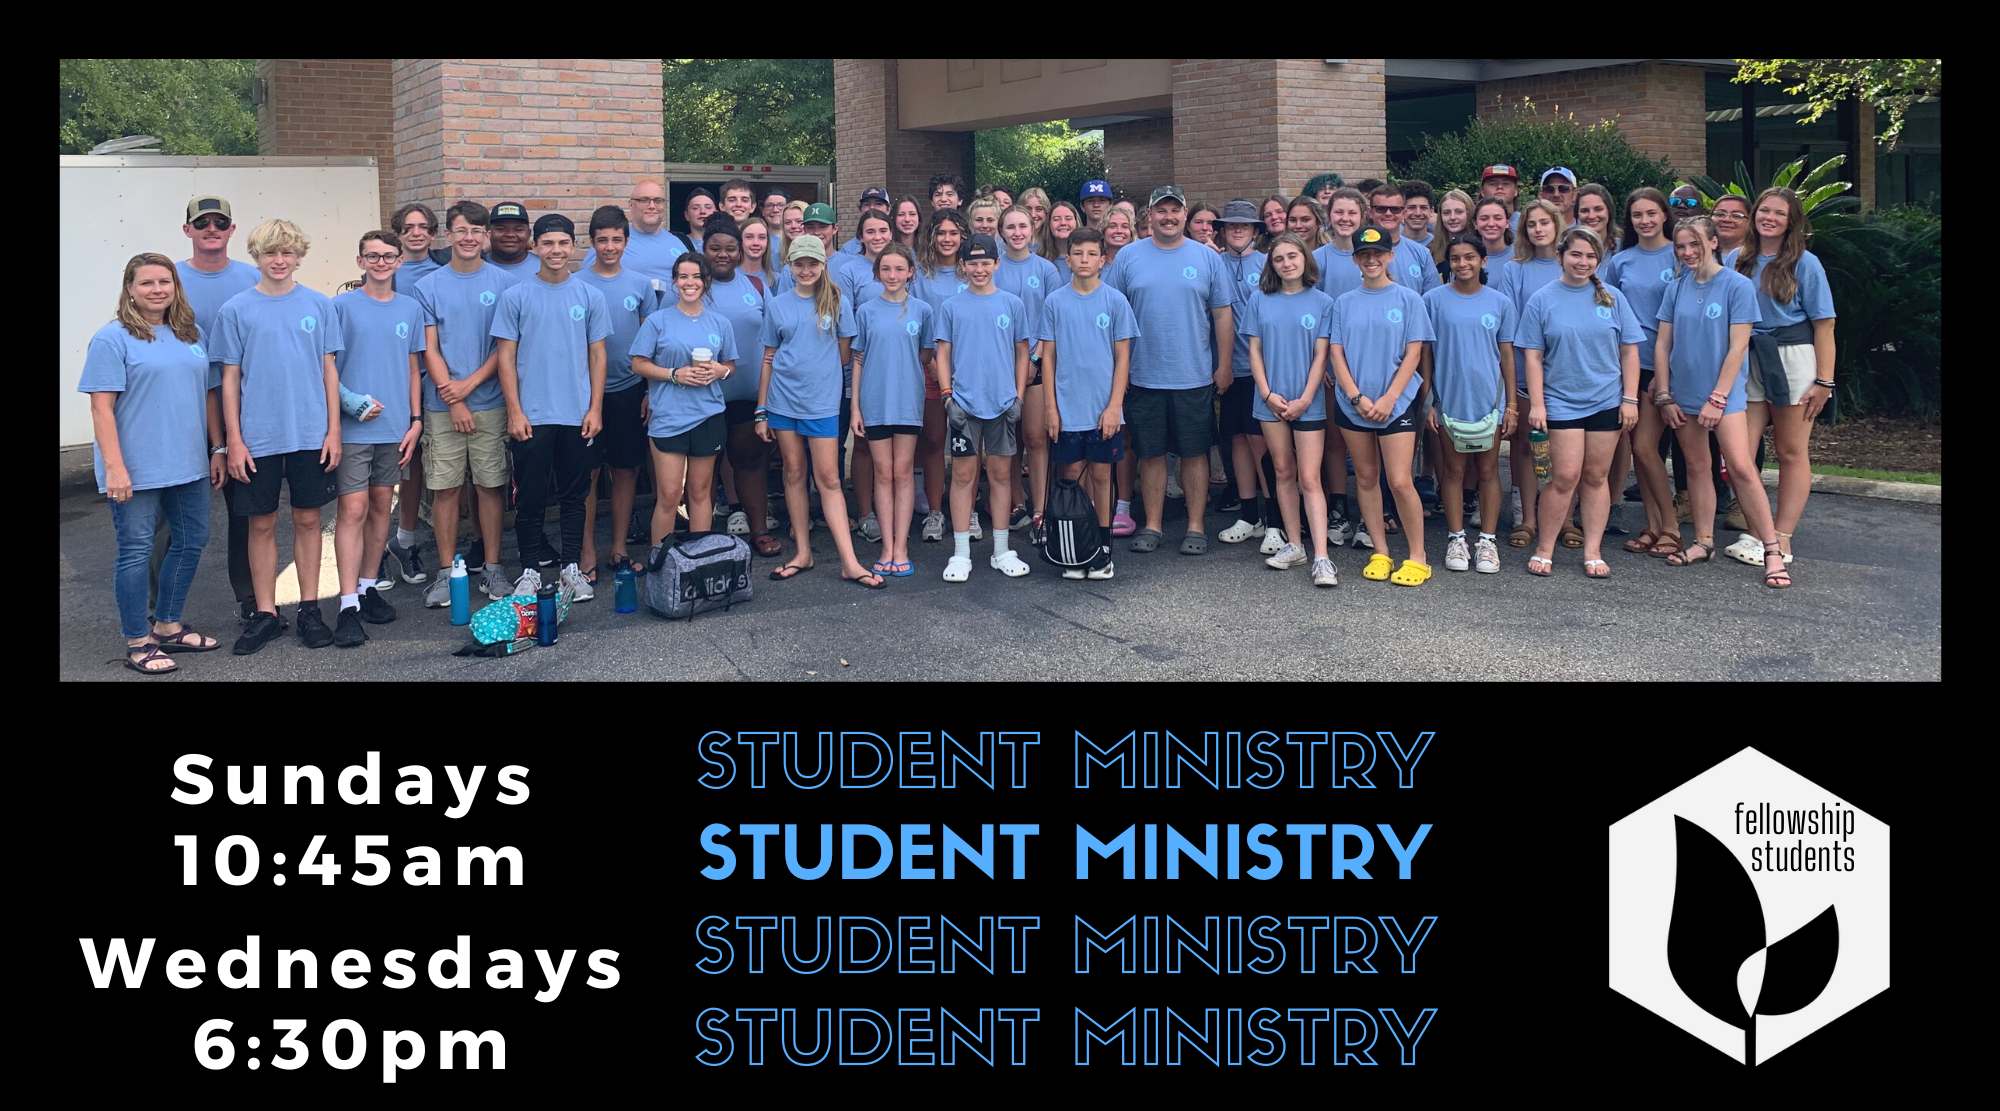 student ministry updated cover photo 8.31.22 (9 x 5)